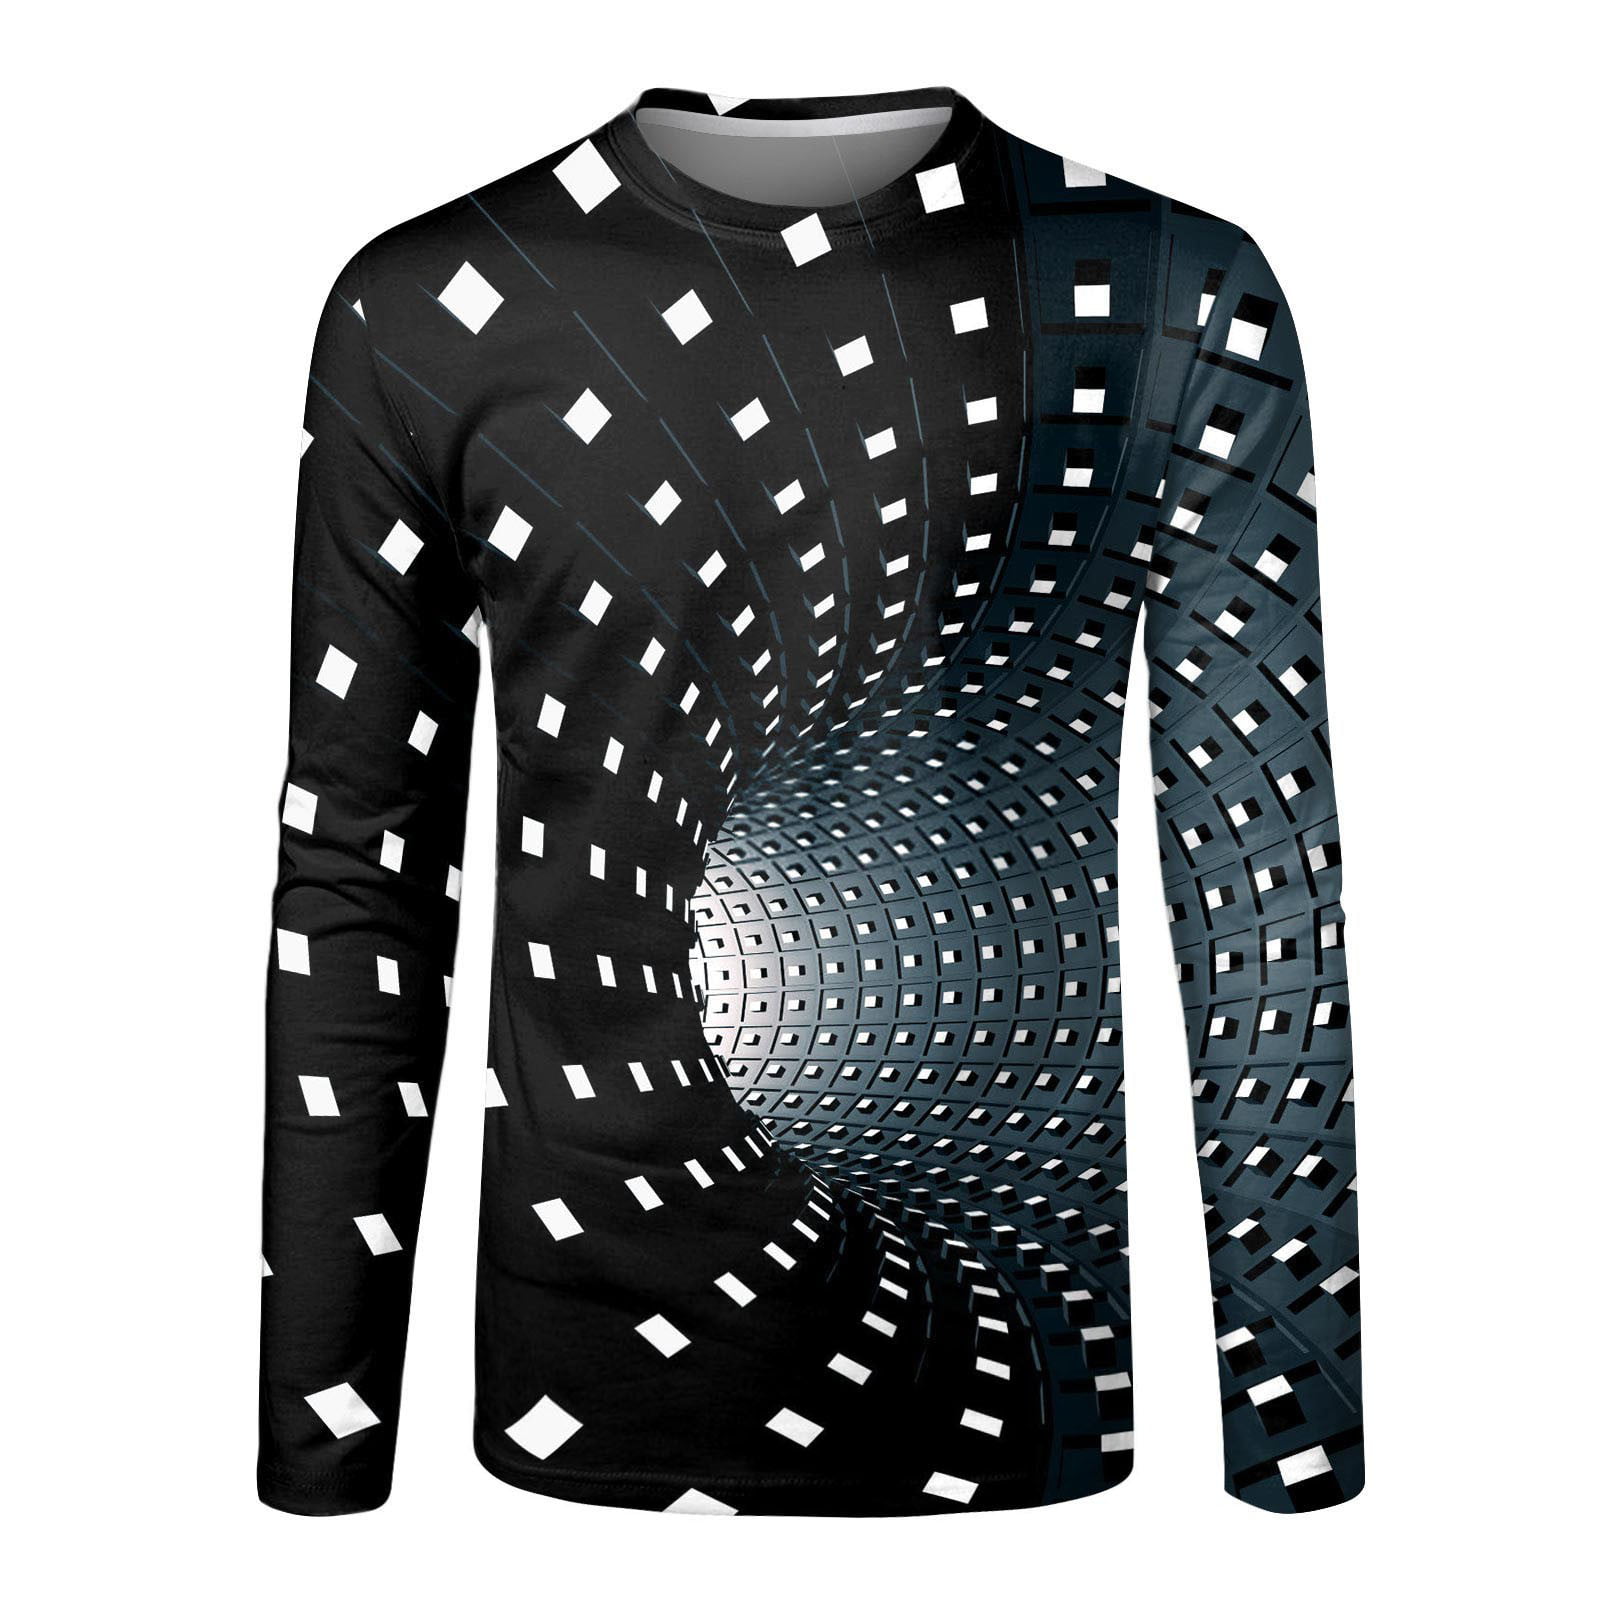 Mens Fashion Casual Sports Abstract Digital Printing Round Neck T Shirt  Long Sleeve Top 